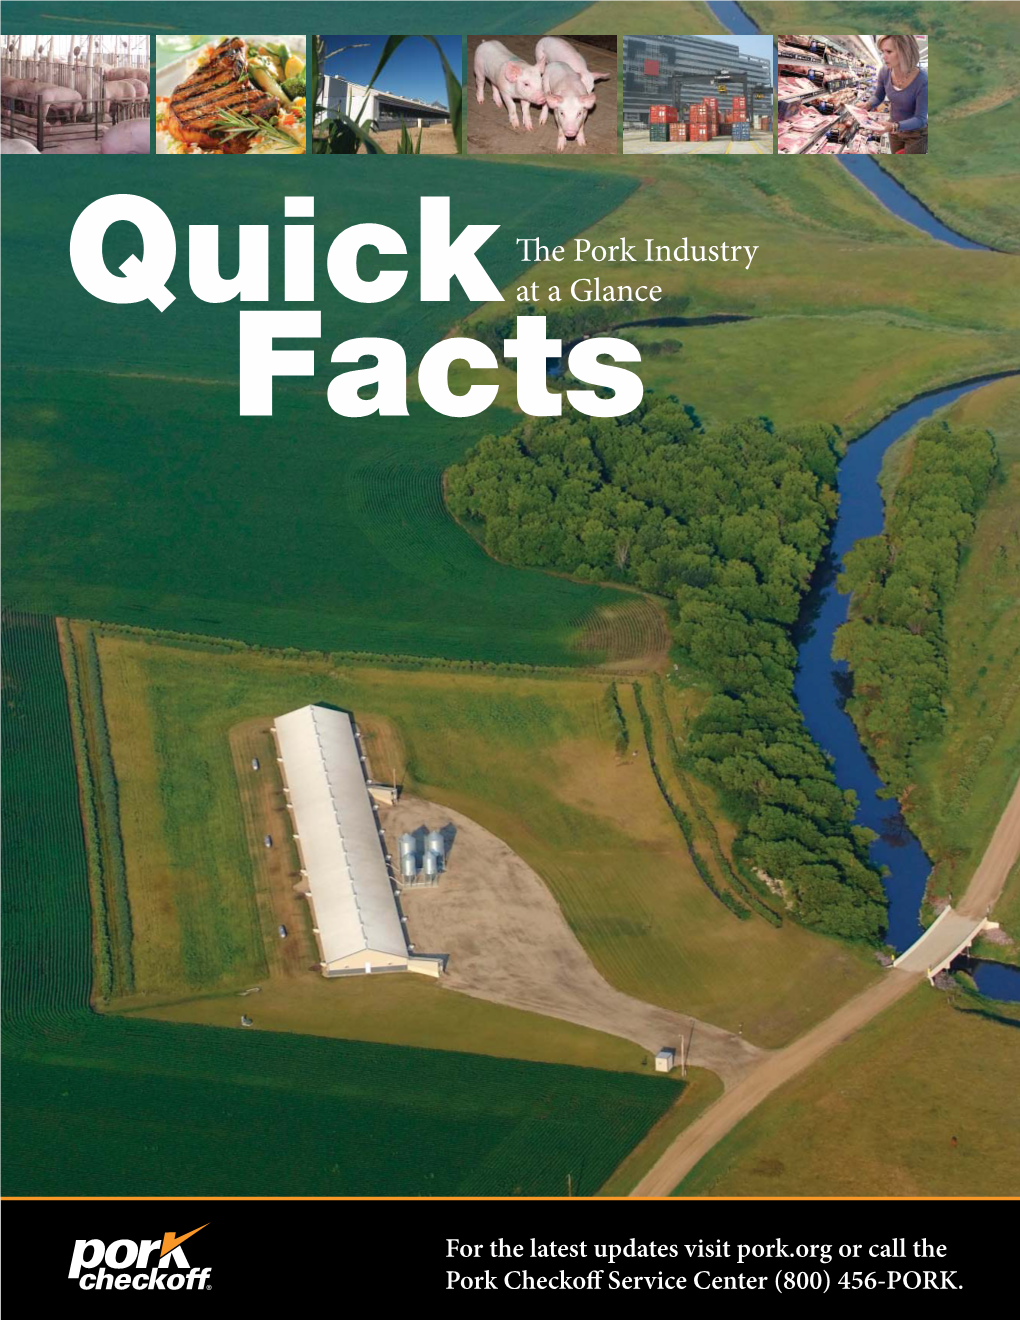 Quick Facts – the Pork Industry at a Glance